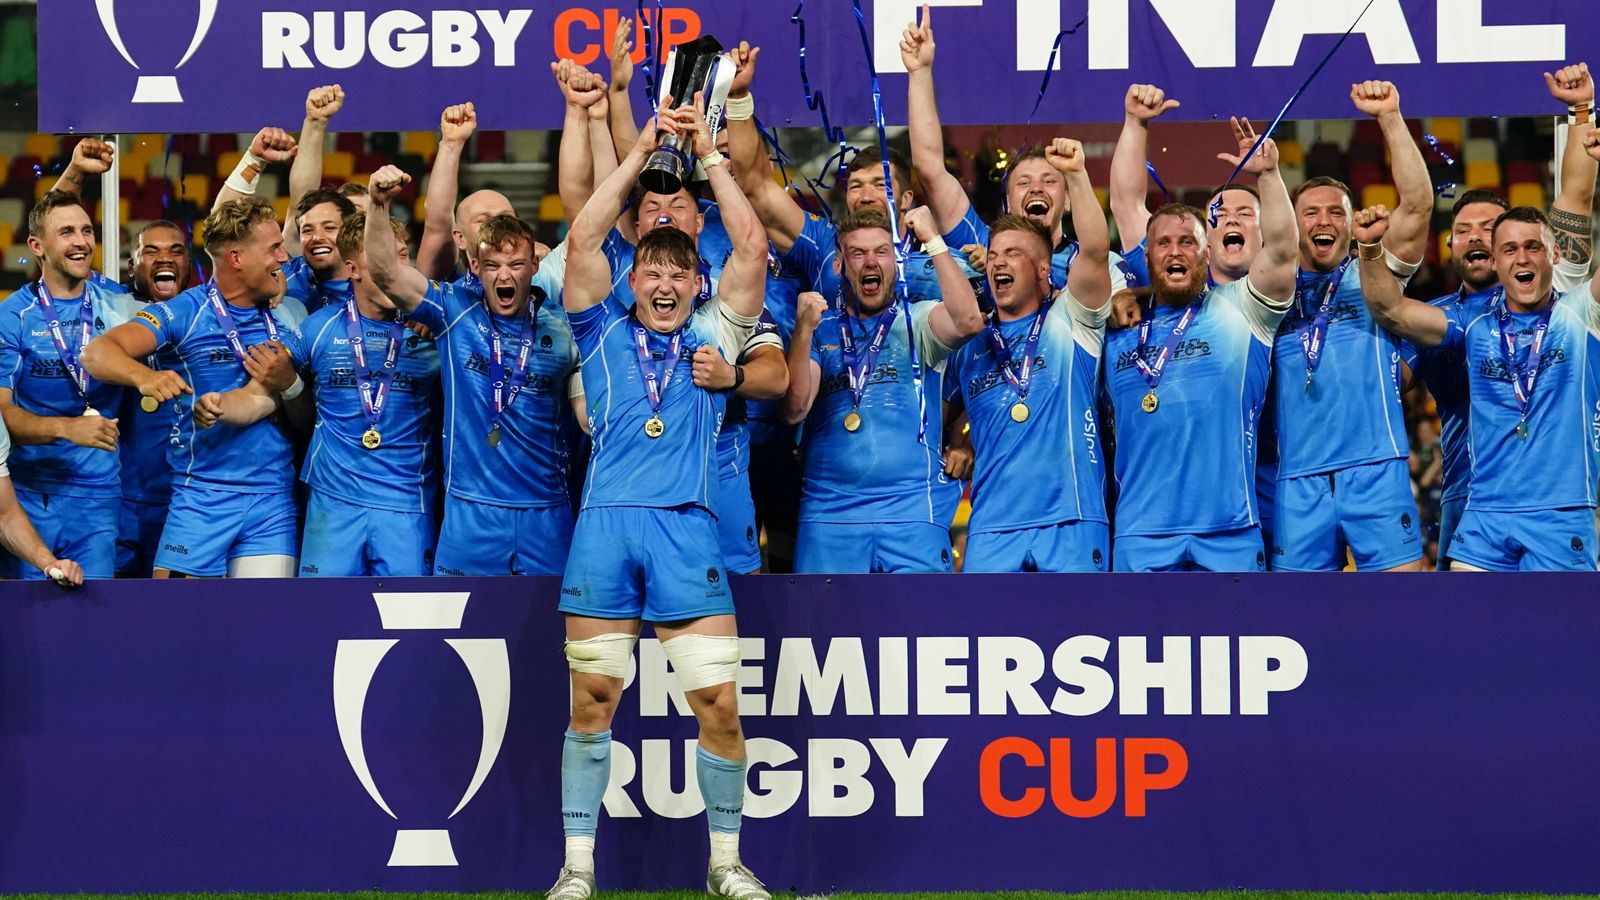 Premiership Rugby Cup Final: Worcester win after dramatic extra time ...